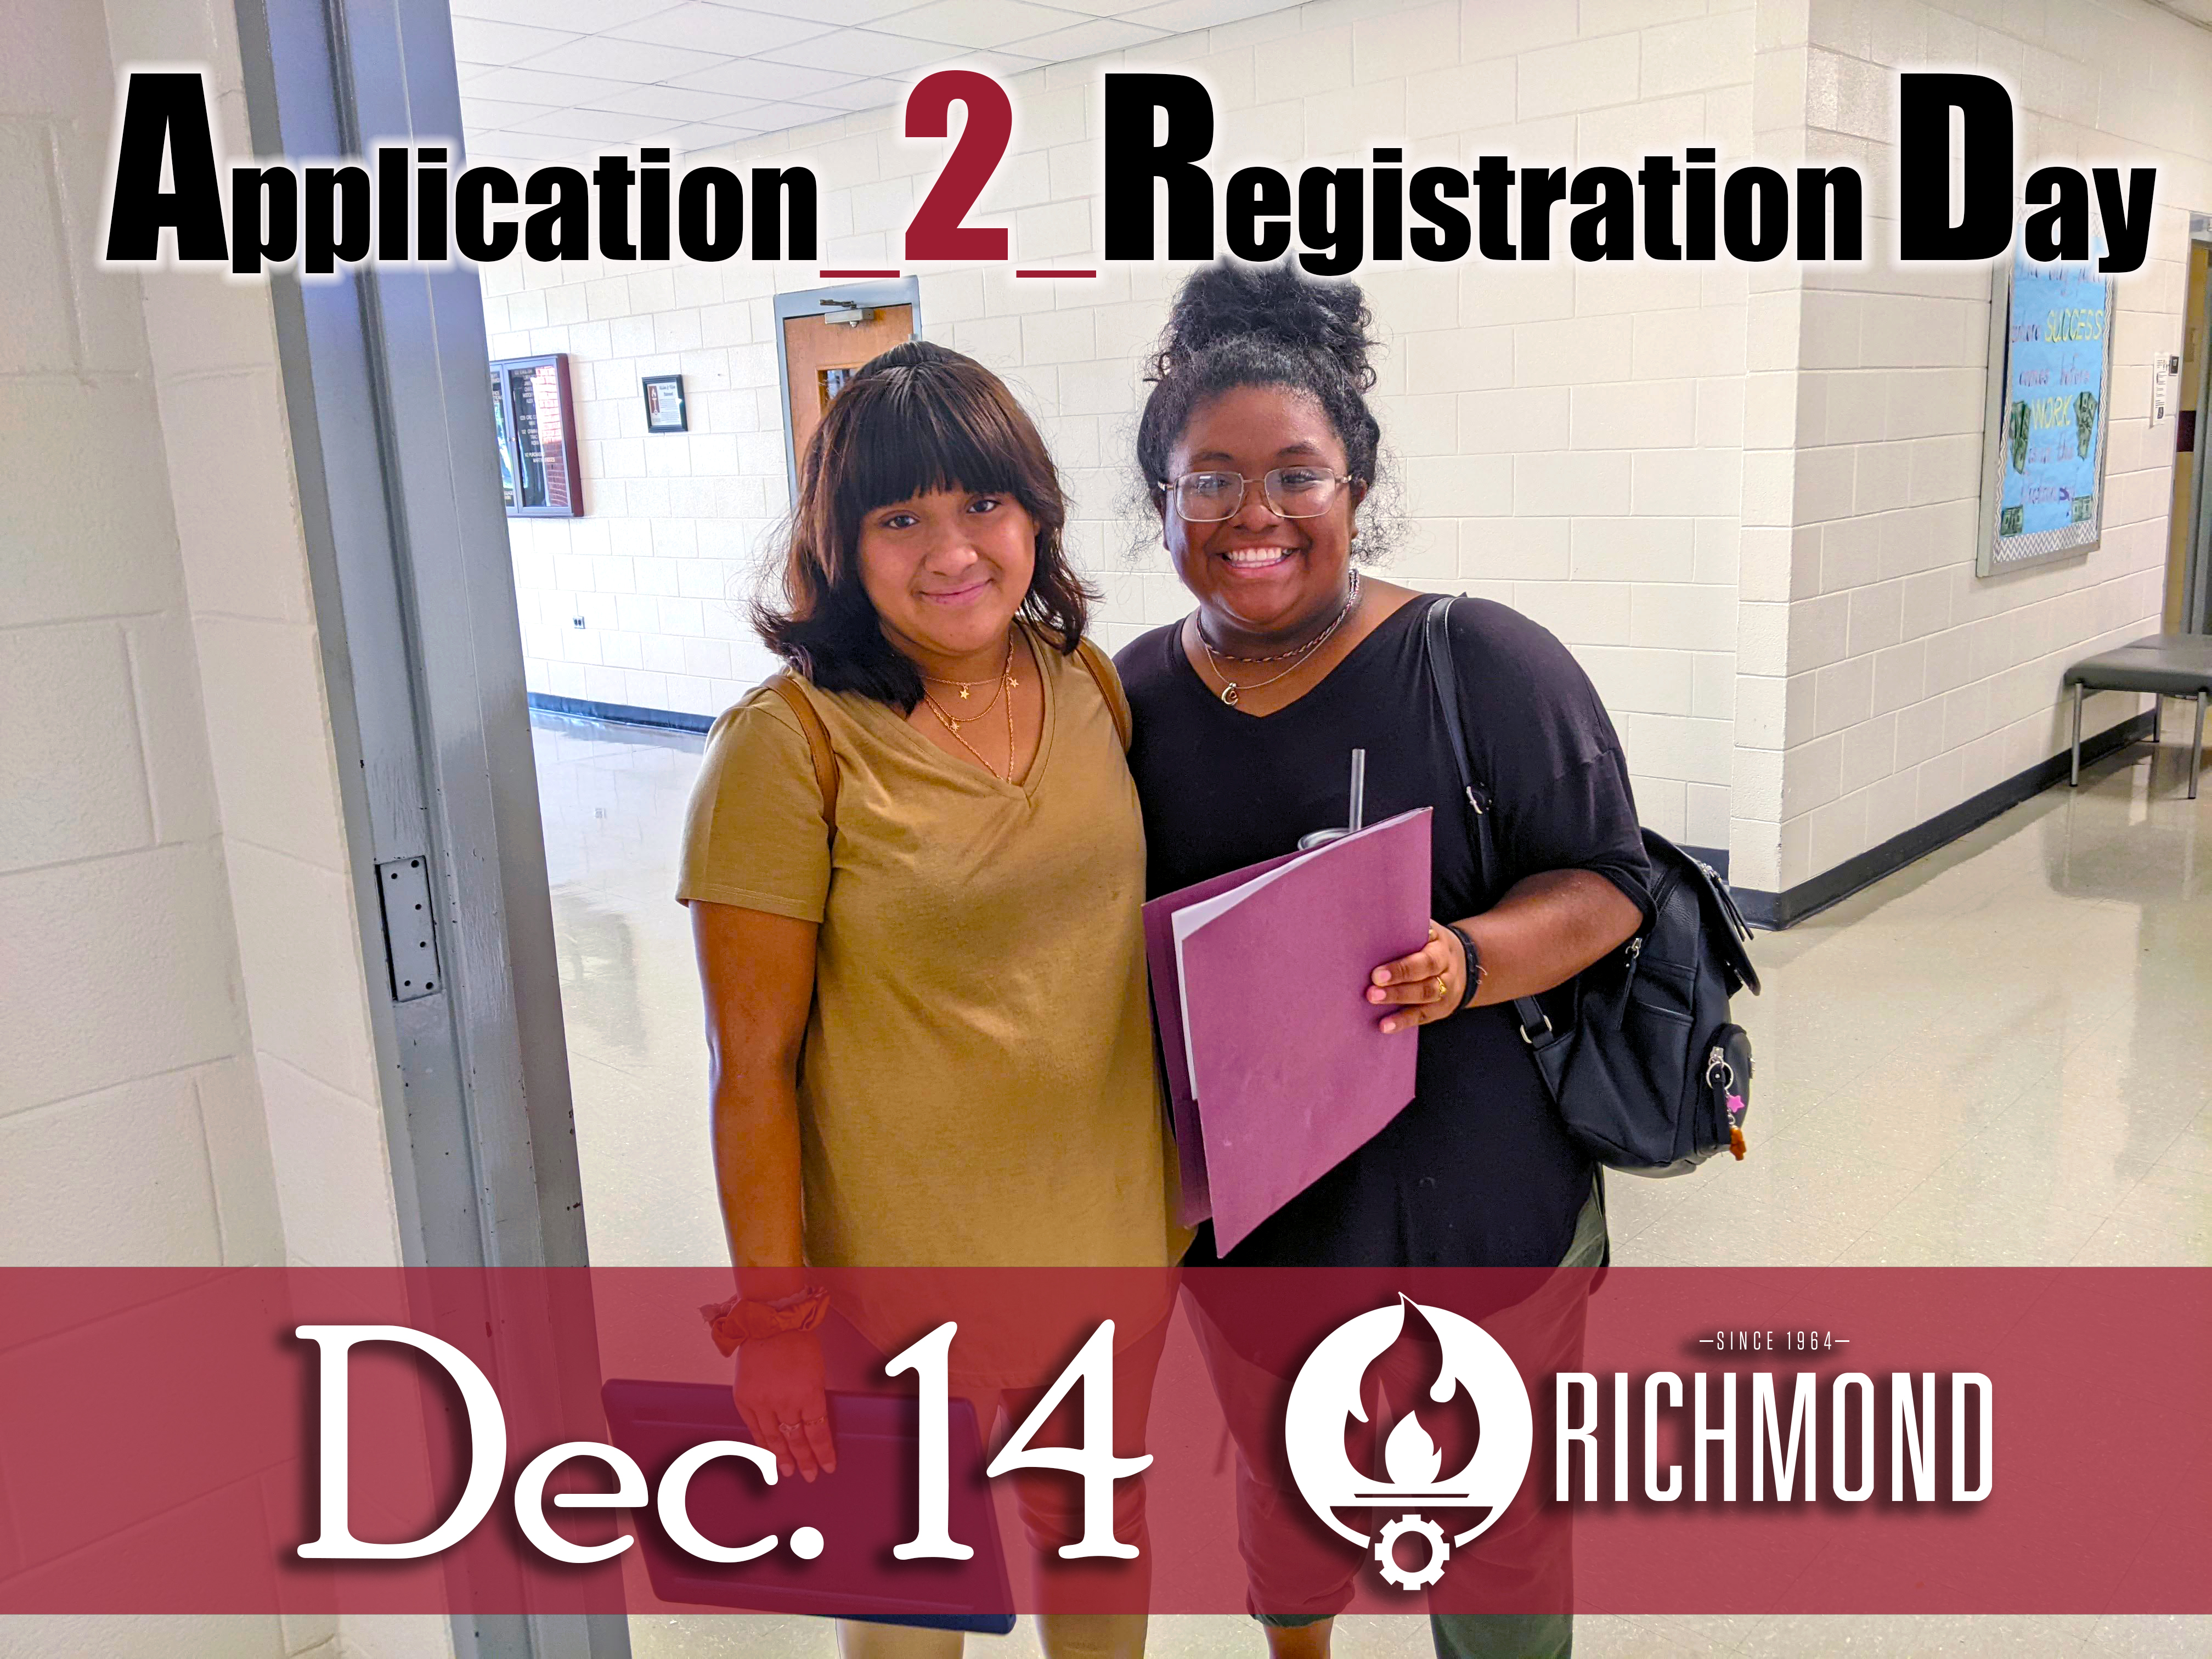 Application to Registration Day Dec. 14 with two students smiling